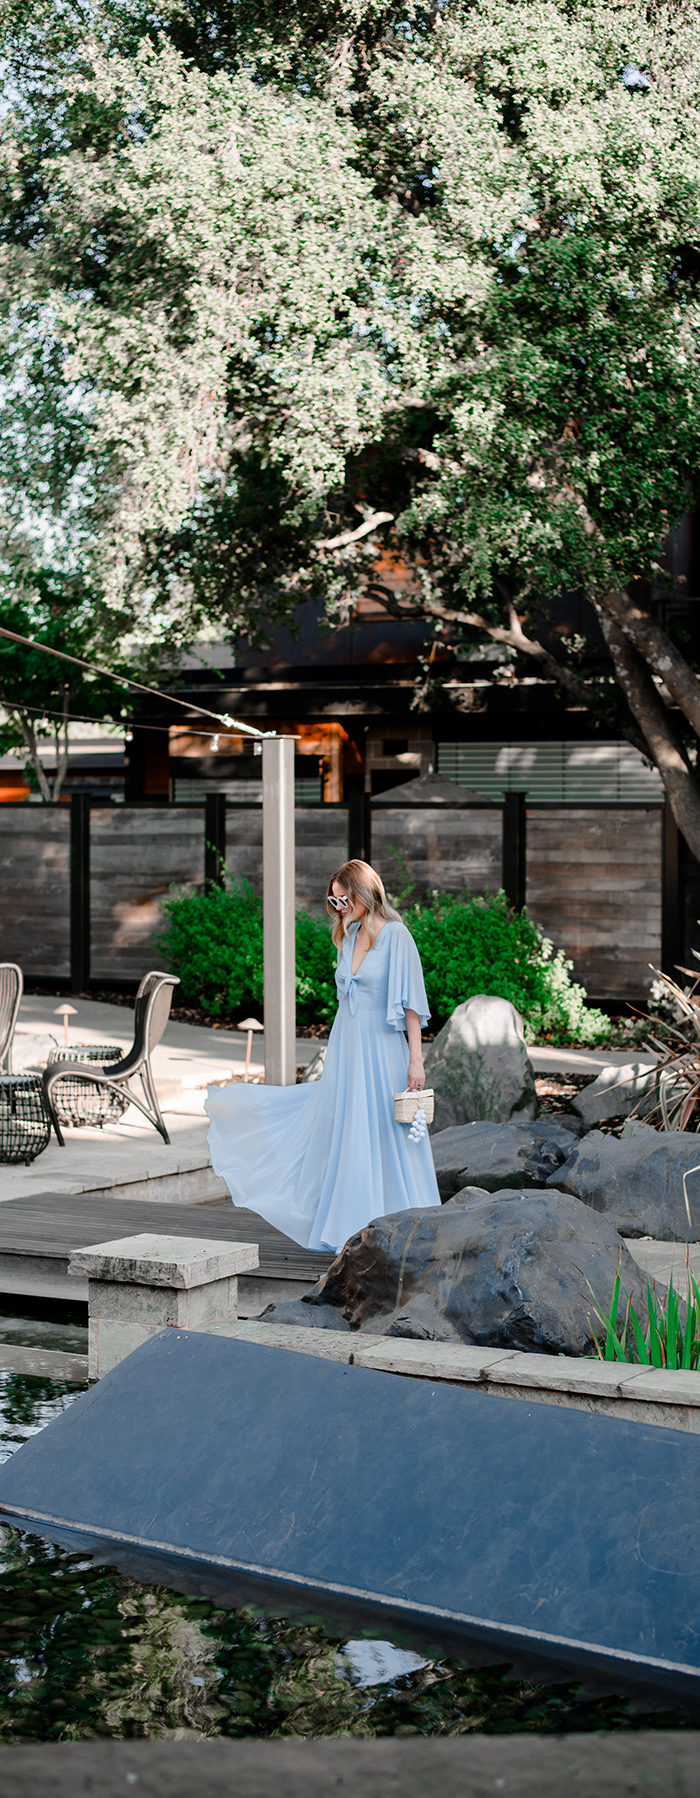 Alyssa Campanella of The A List blog visits Bardessono with Visit Napa Valley wearing Yumi Kim Forever and Always Maxi dress